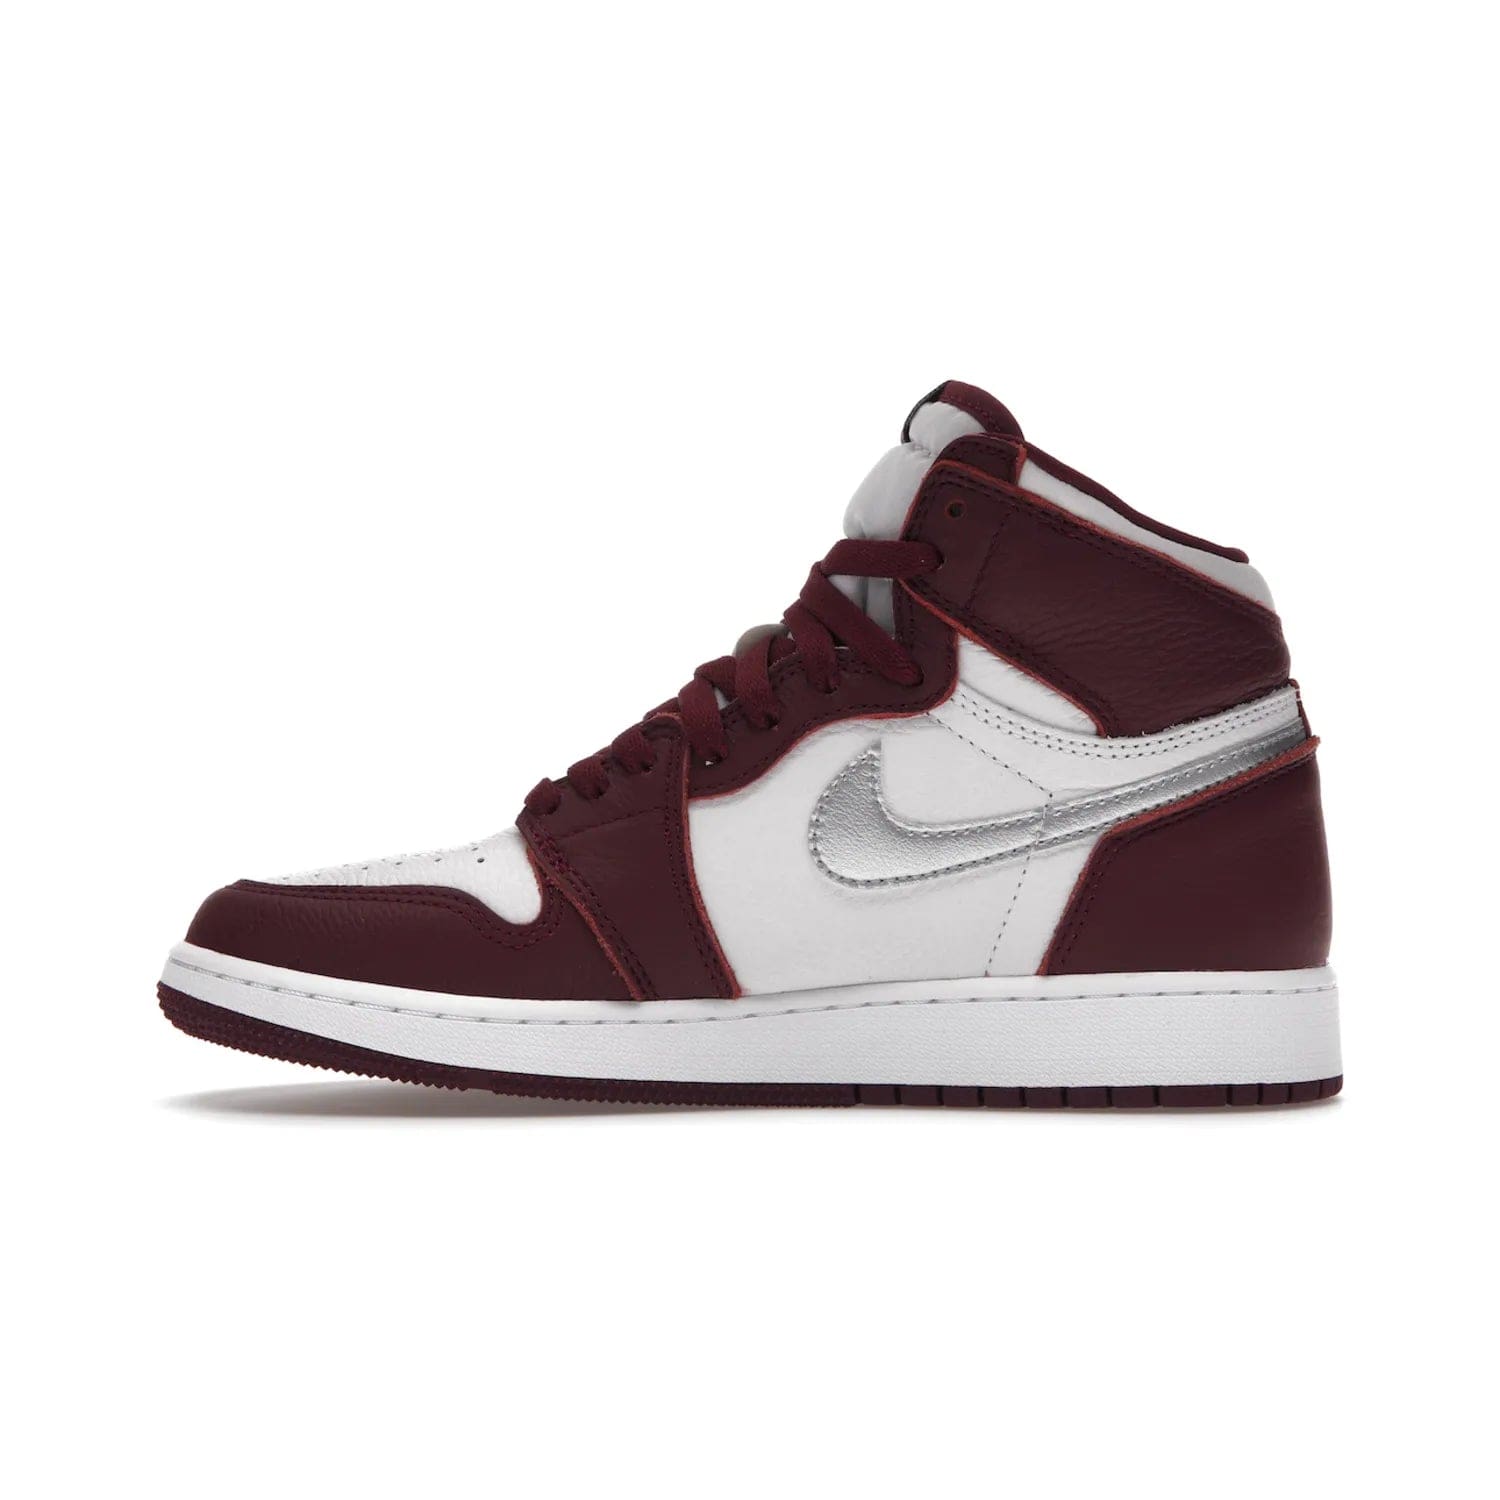 Jordan 1 Retro High OG Bordeaux (GS) - Image 19 - Only at www.BallersClubKickz.com - #
Introducing the Air Jordan 1 Retro High OG Bordeaux GS – a signature colorway part of the Jordan Brand Fall 2021 lineup. White leather upper & Bordeaux overlays, metallic silver swoosh, jeweled Air Jordan Wings logo & more. Step up your style game with this sleek fall season silhouette.